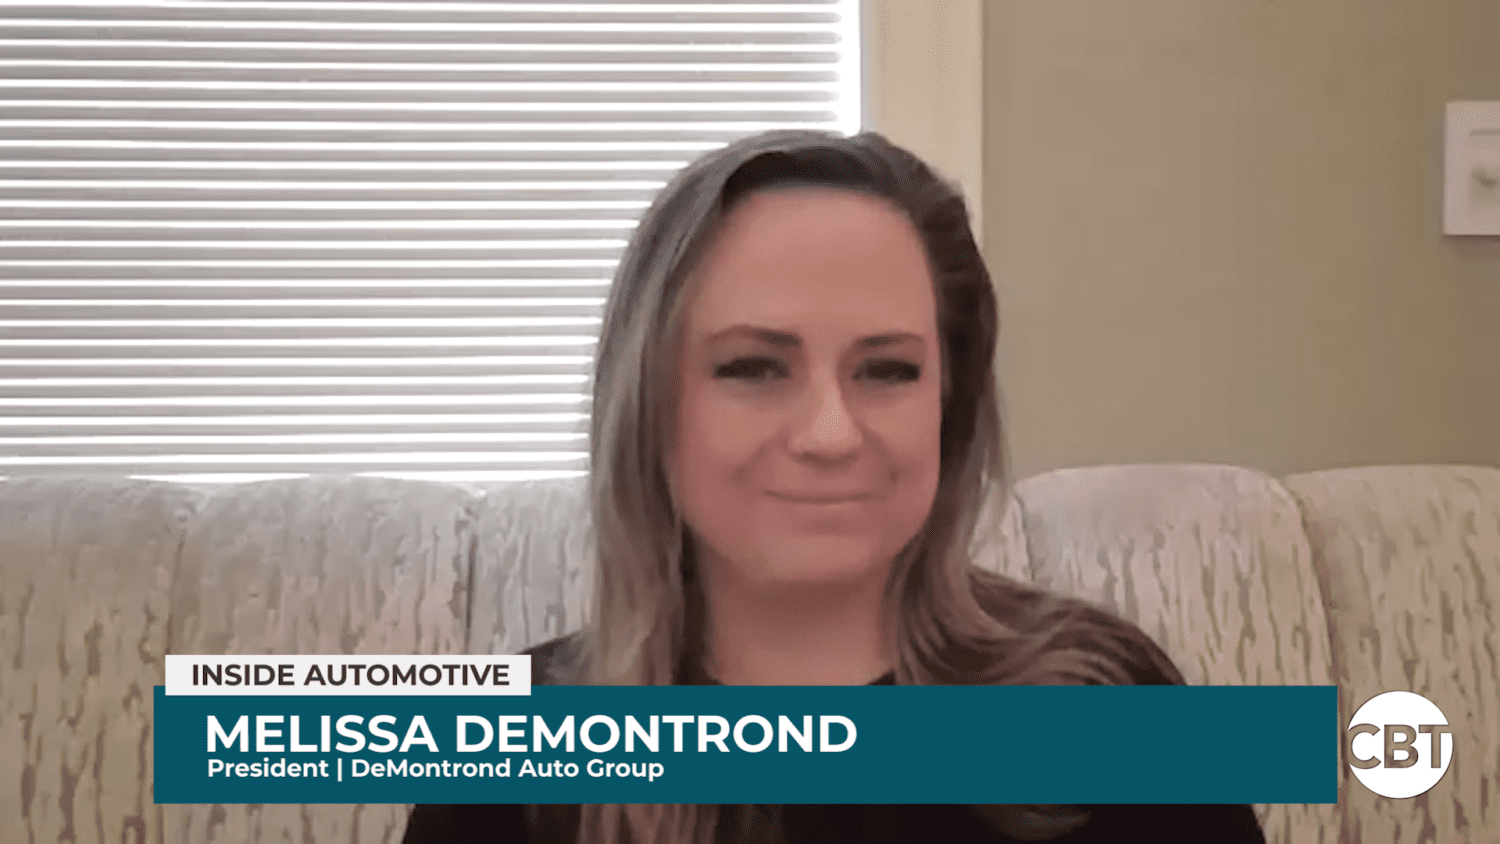 Melissa DeMontrond joins Inside Automotive to discuss why her dealership group built an in-store clinic for employees and their families.